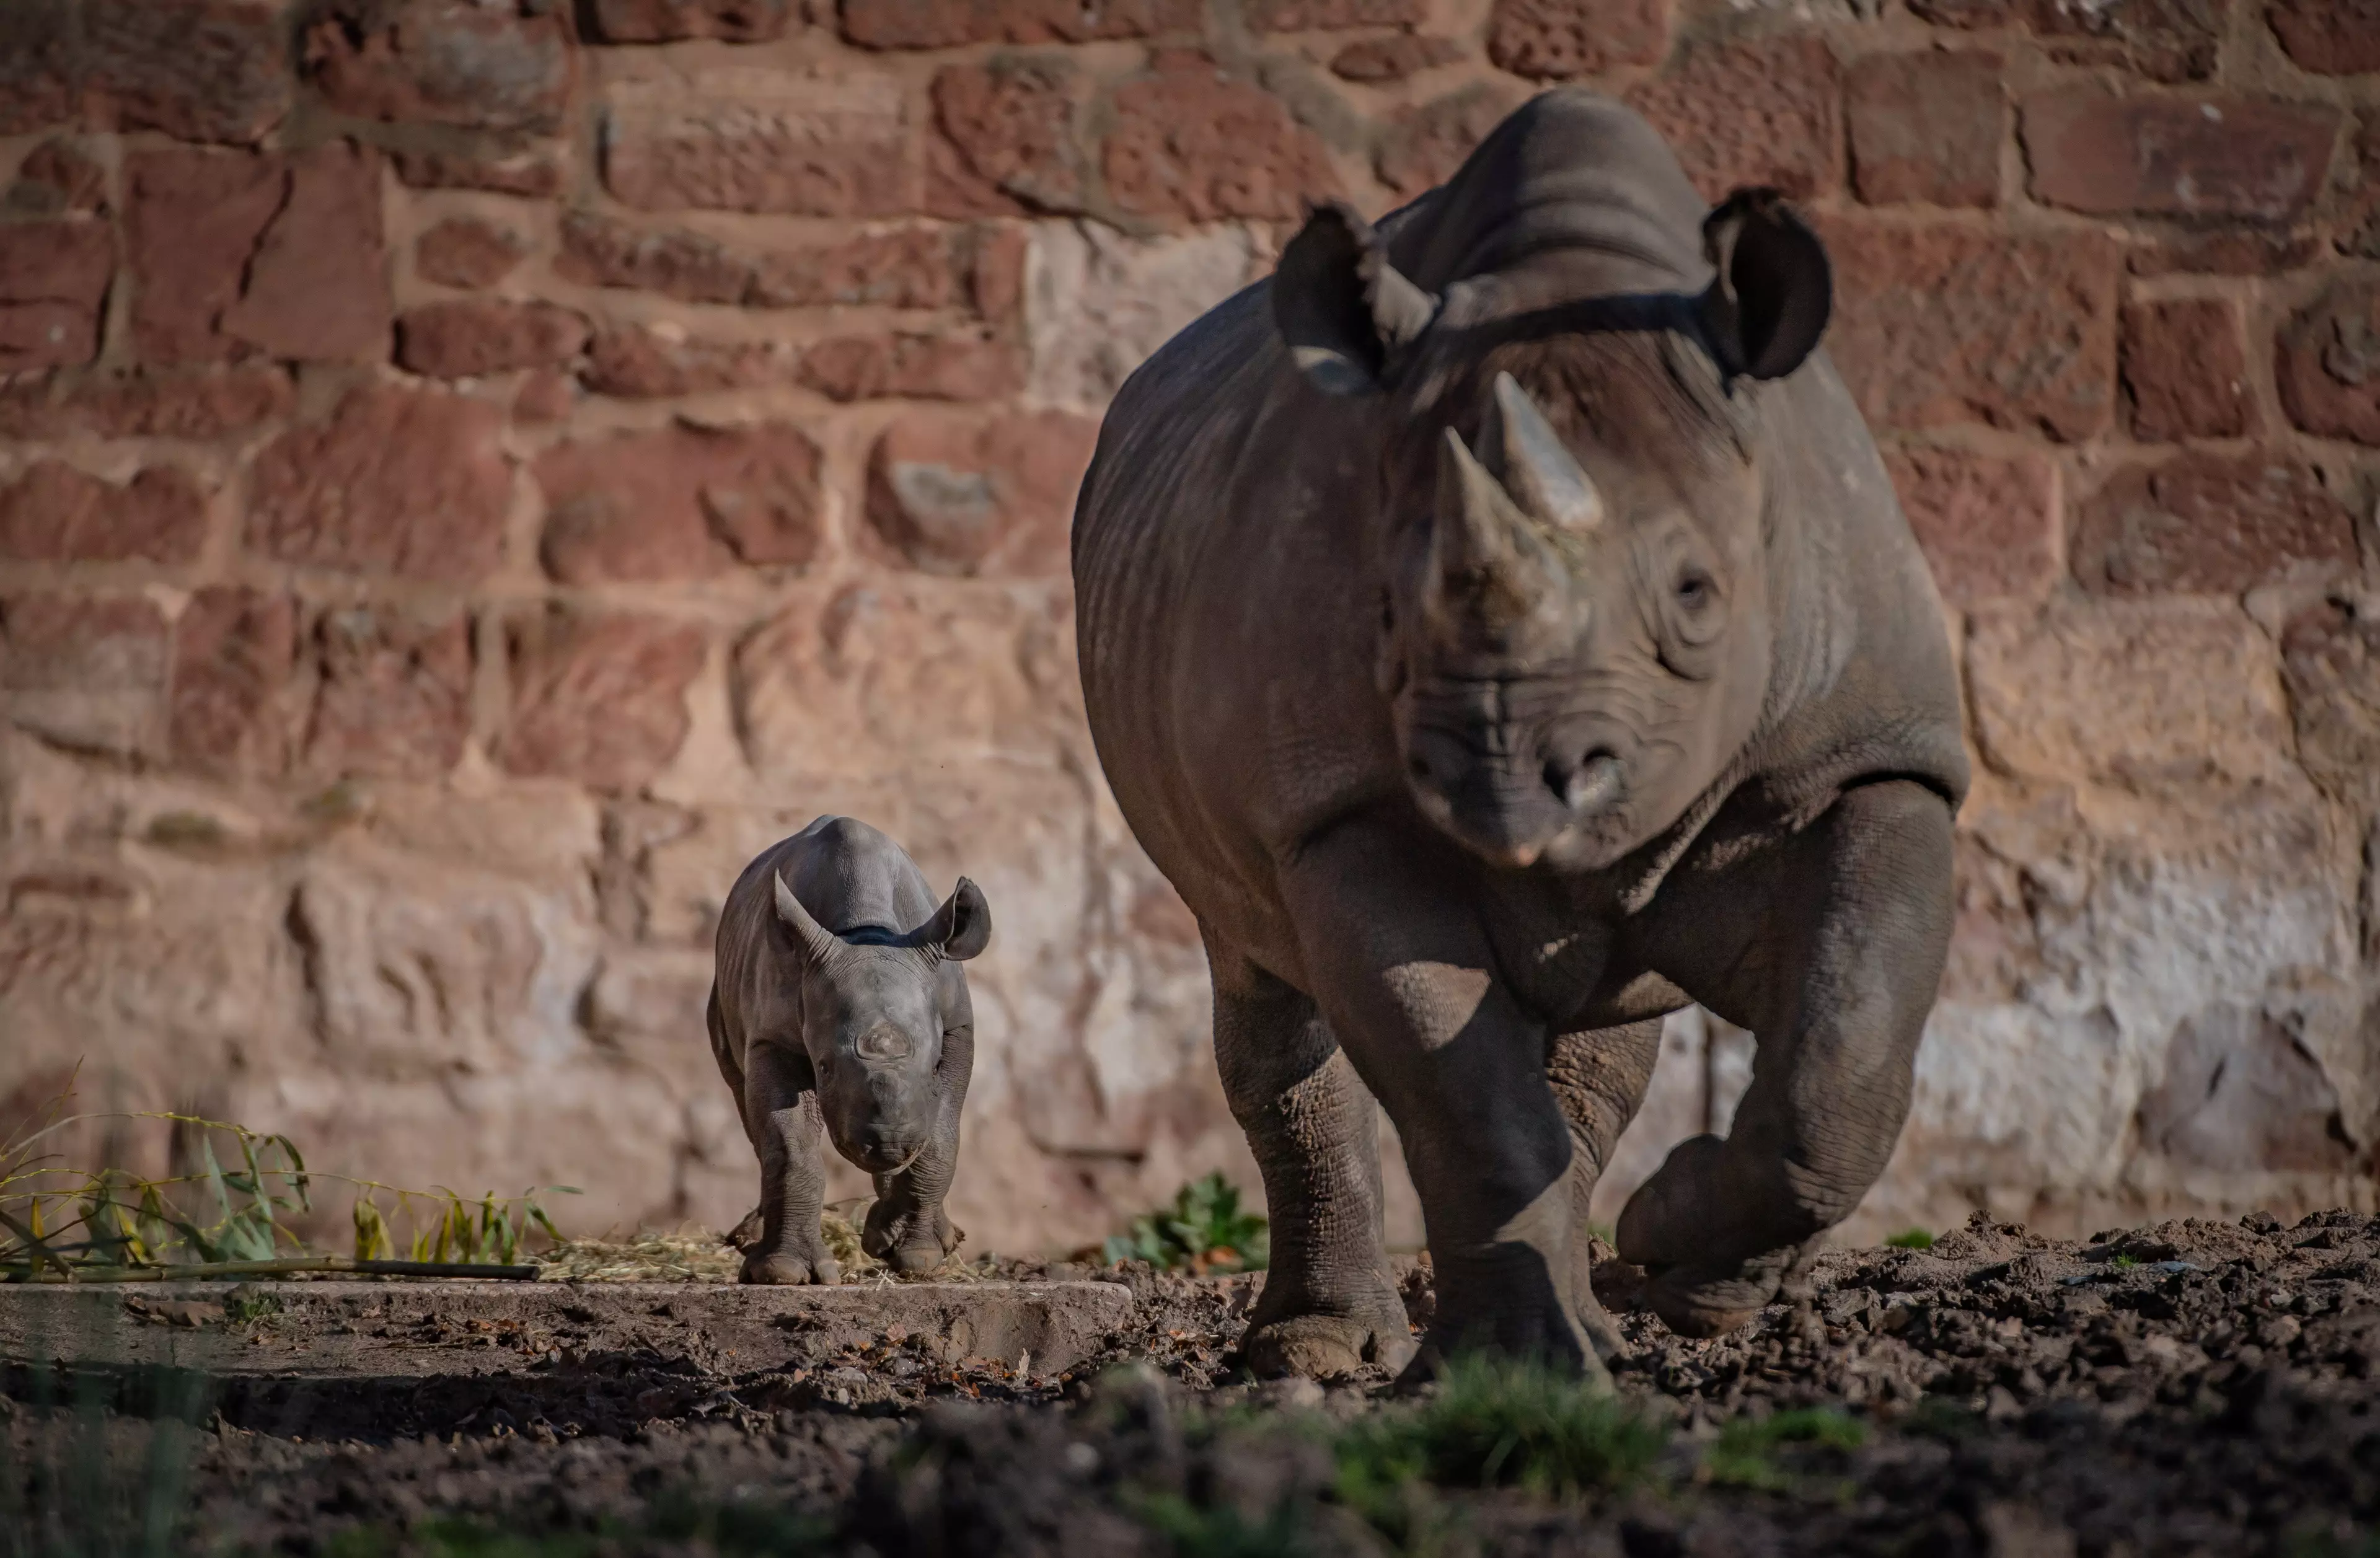 Zookeepers are now asking the public to help them decide on the name of the little rhino (